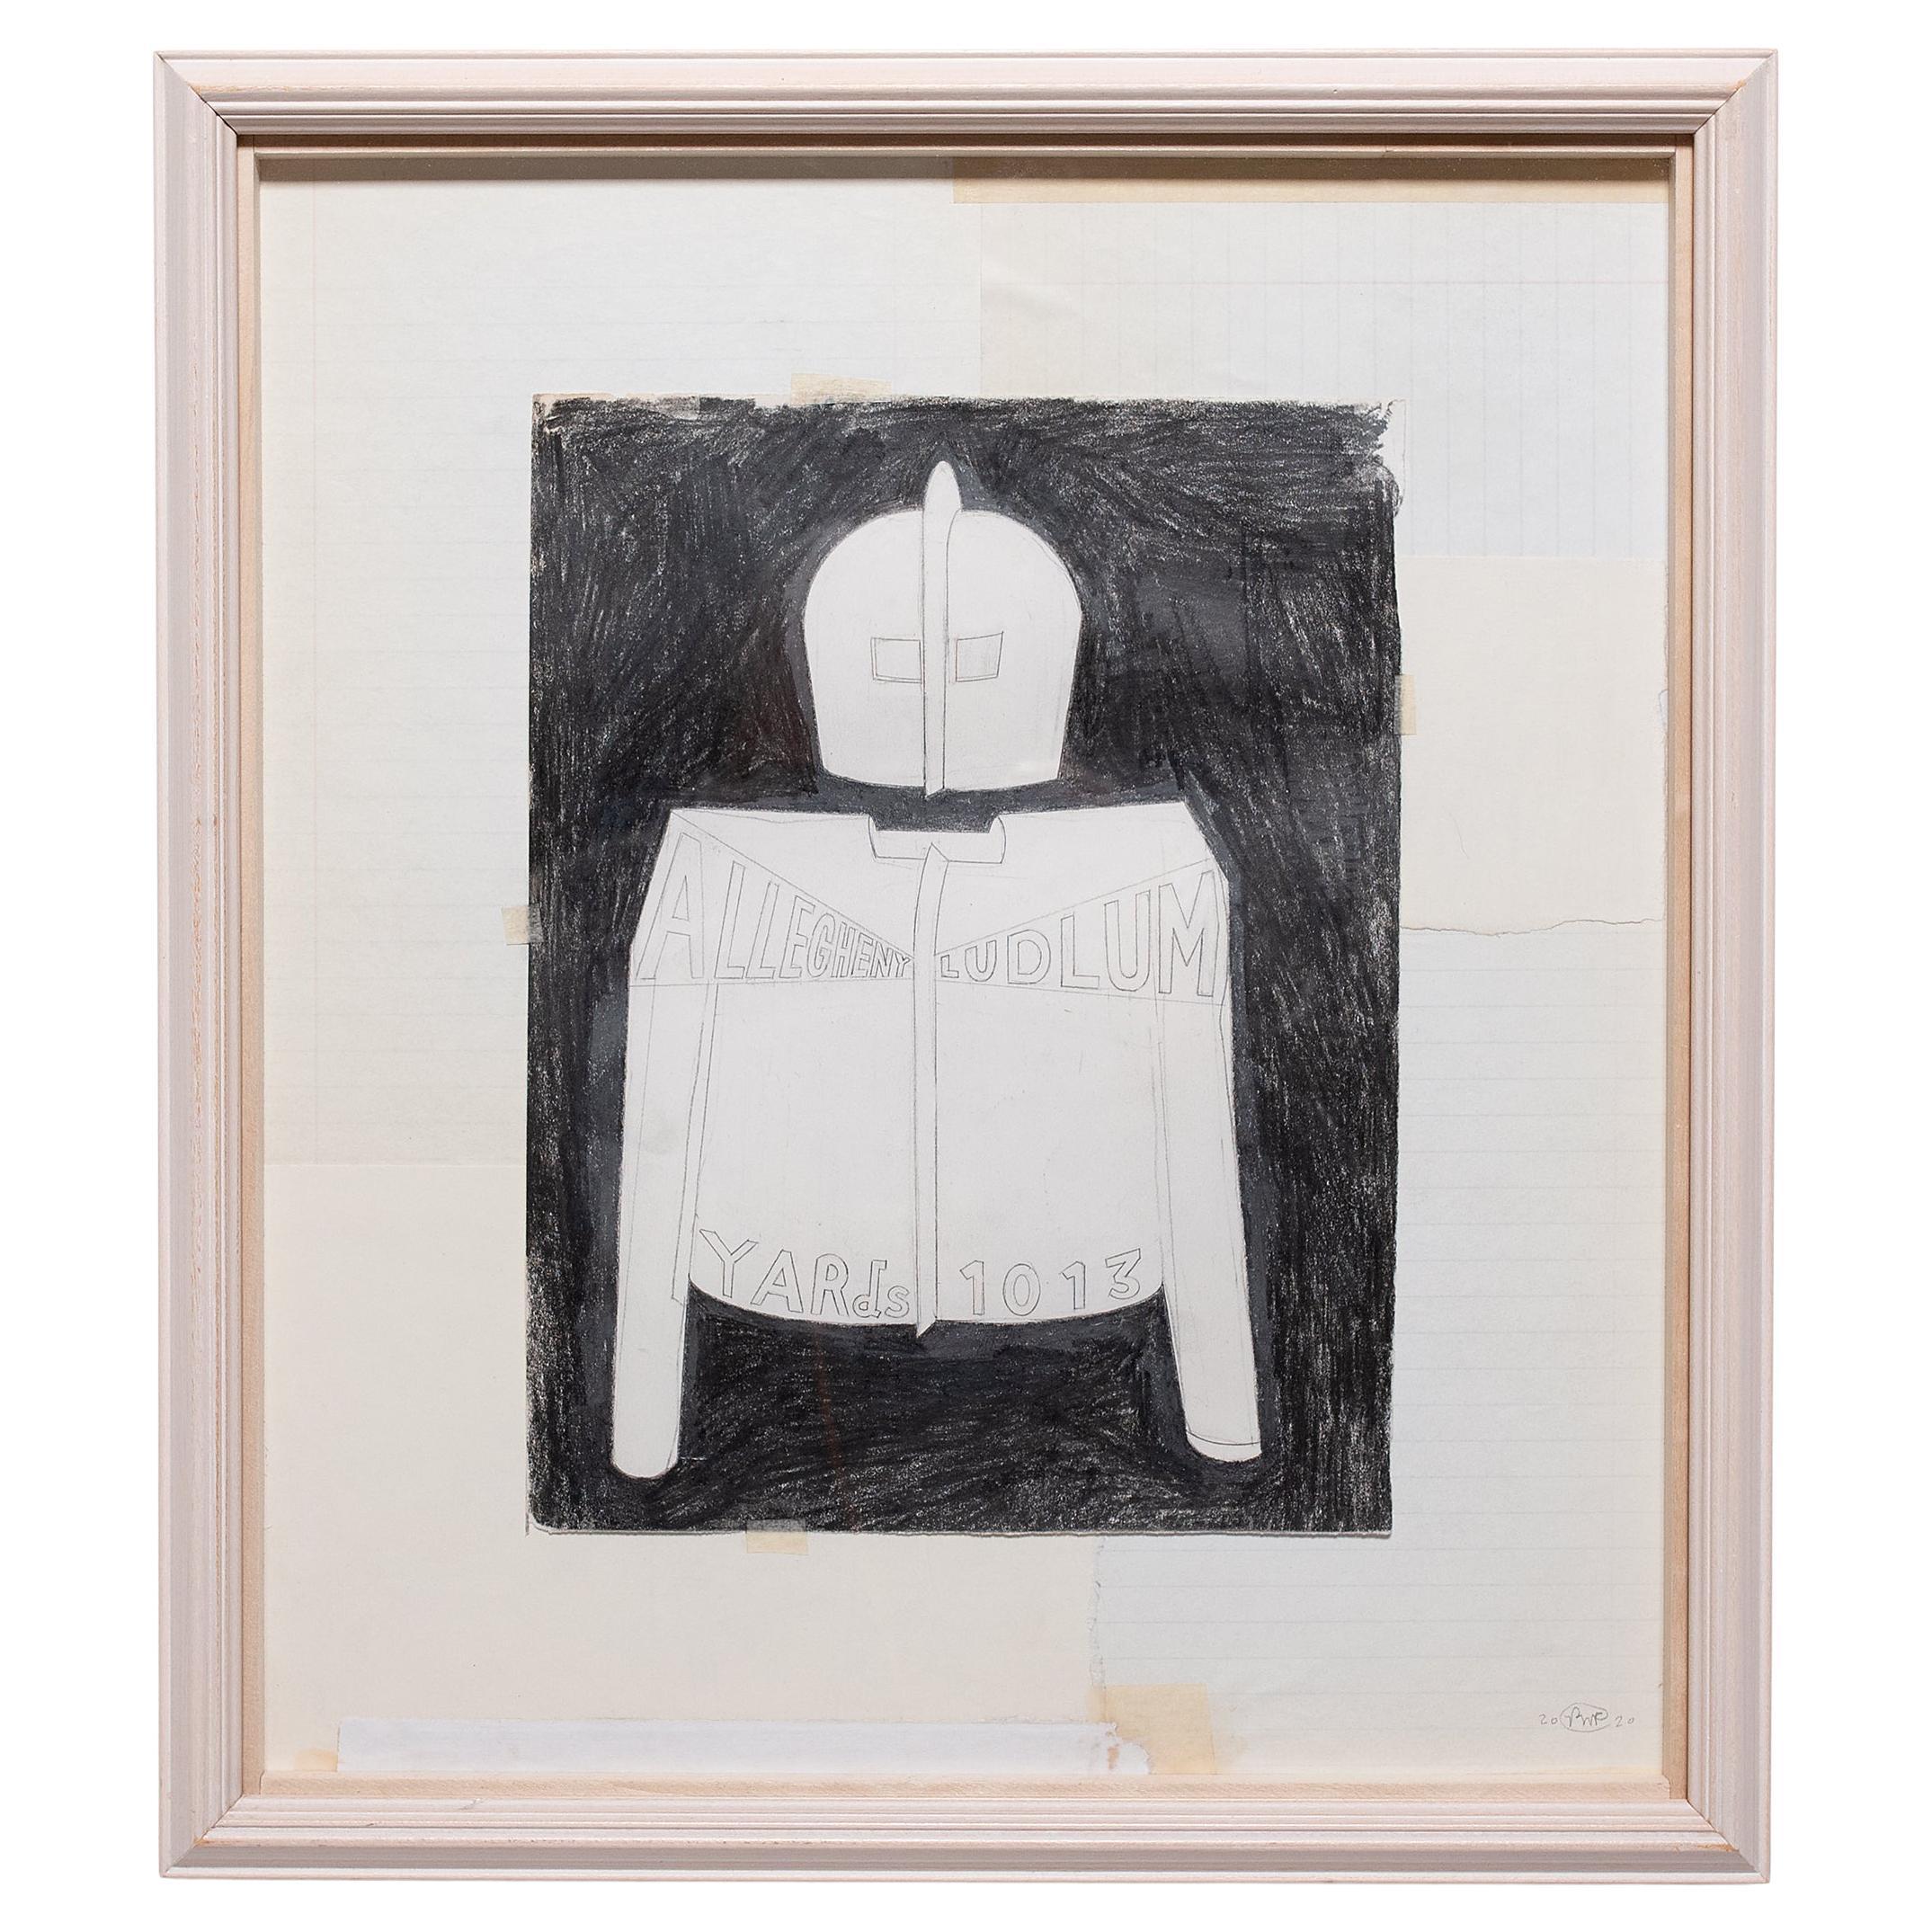 "Drawing for Allegheny + Ludlum Helmet & Jacket" by Patrick Fitzgerald For Sale